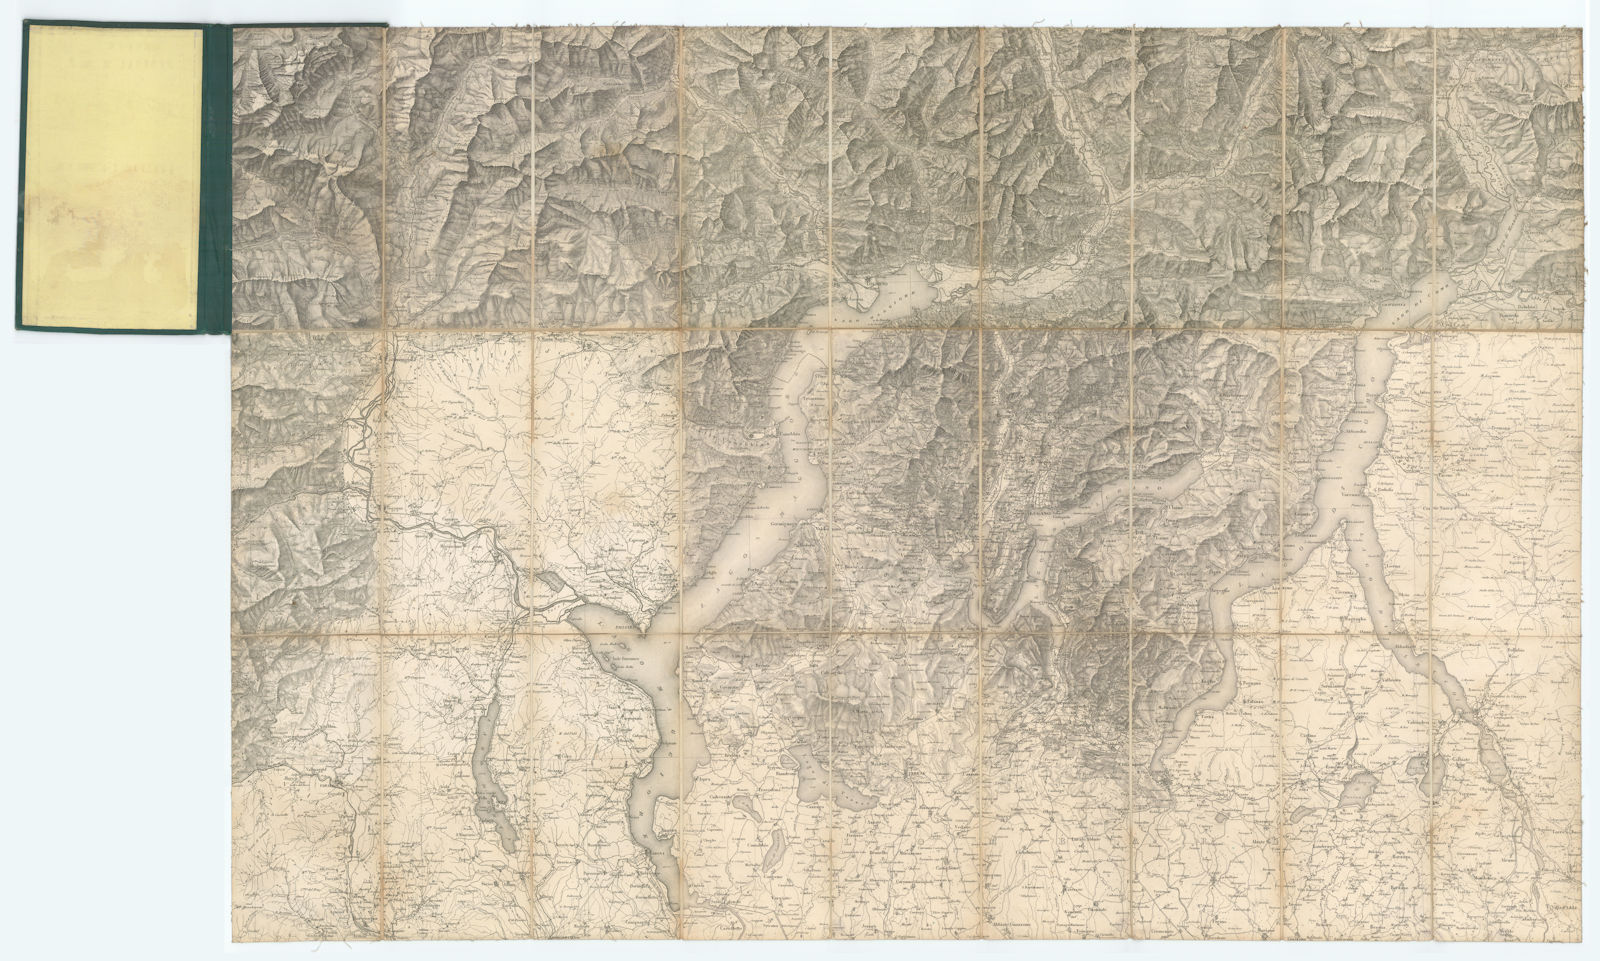 Italian Lakes by Swiss Federal Office of Topography. 105x70cm. Folding map 1874